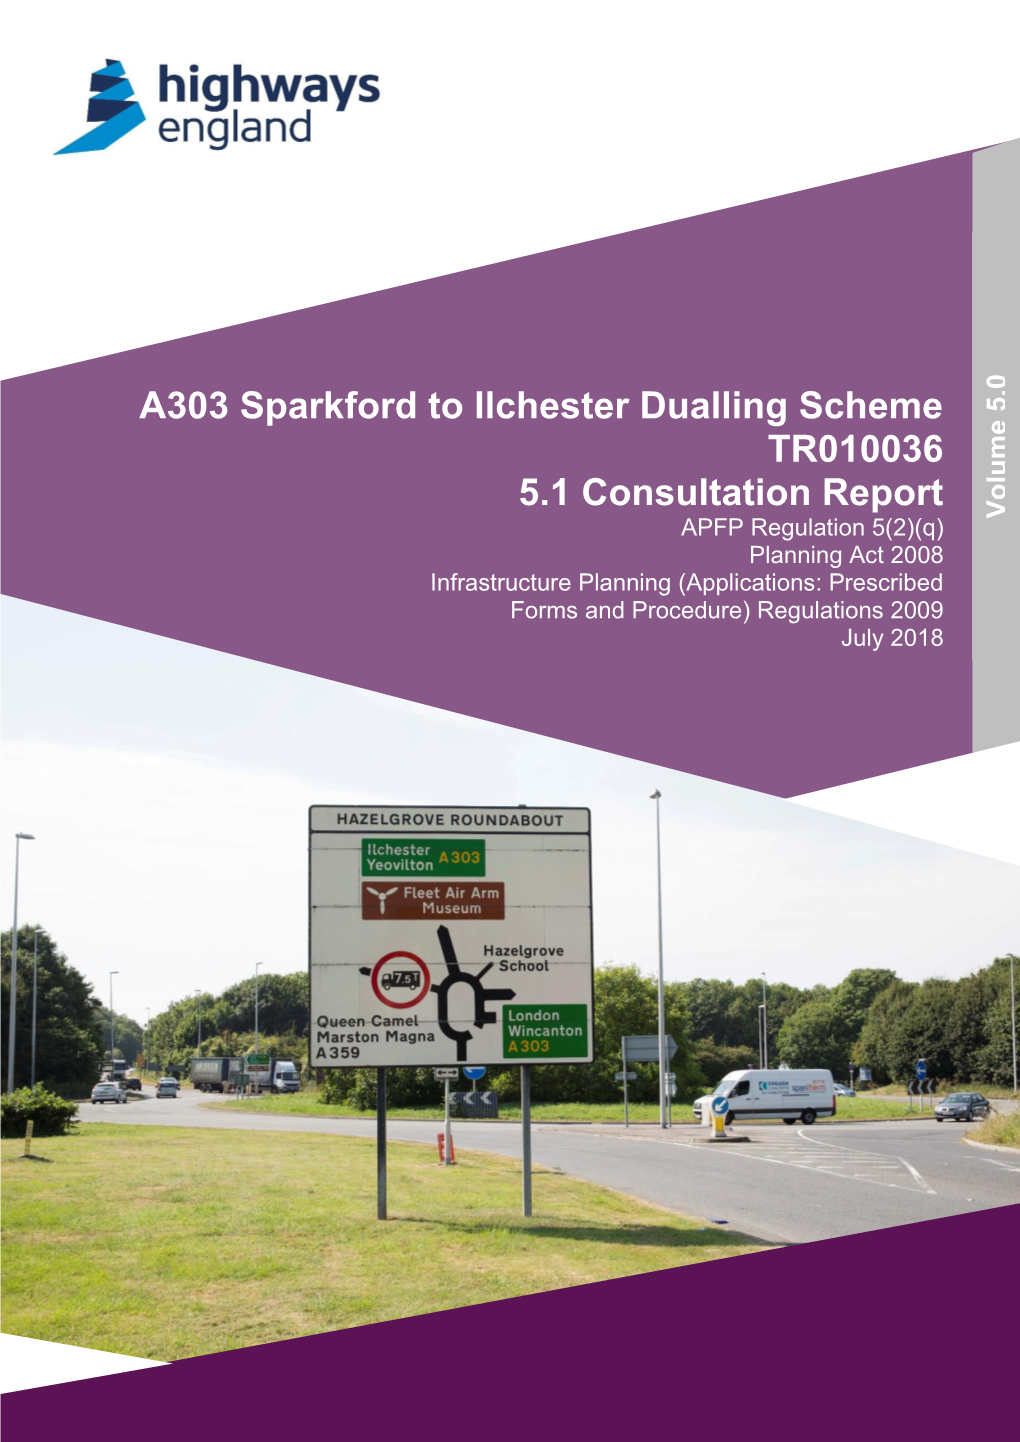 A303 Sparkford to Ilchester Dualling Scheme TR010036 5.1